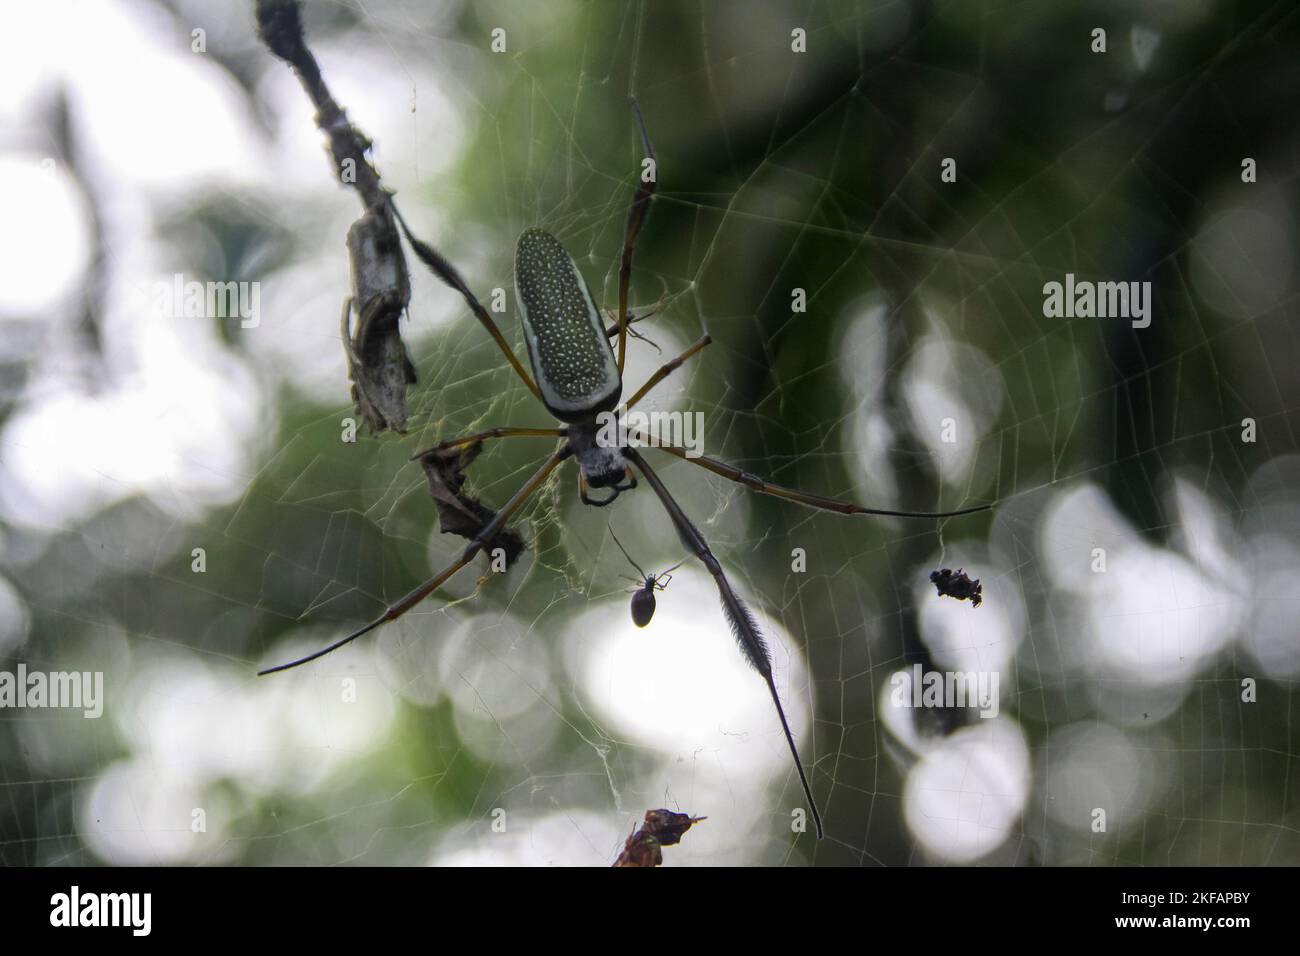 Large orb weaver spider on its web Photographed at Banos, Ecuador Stock Photo